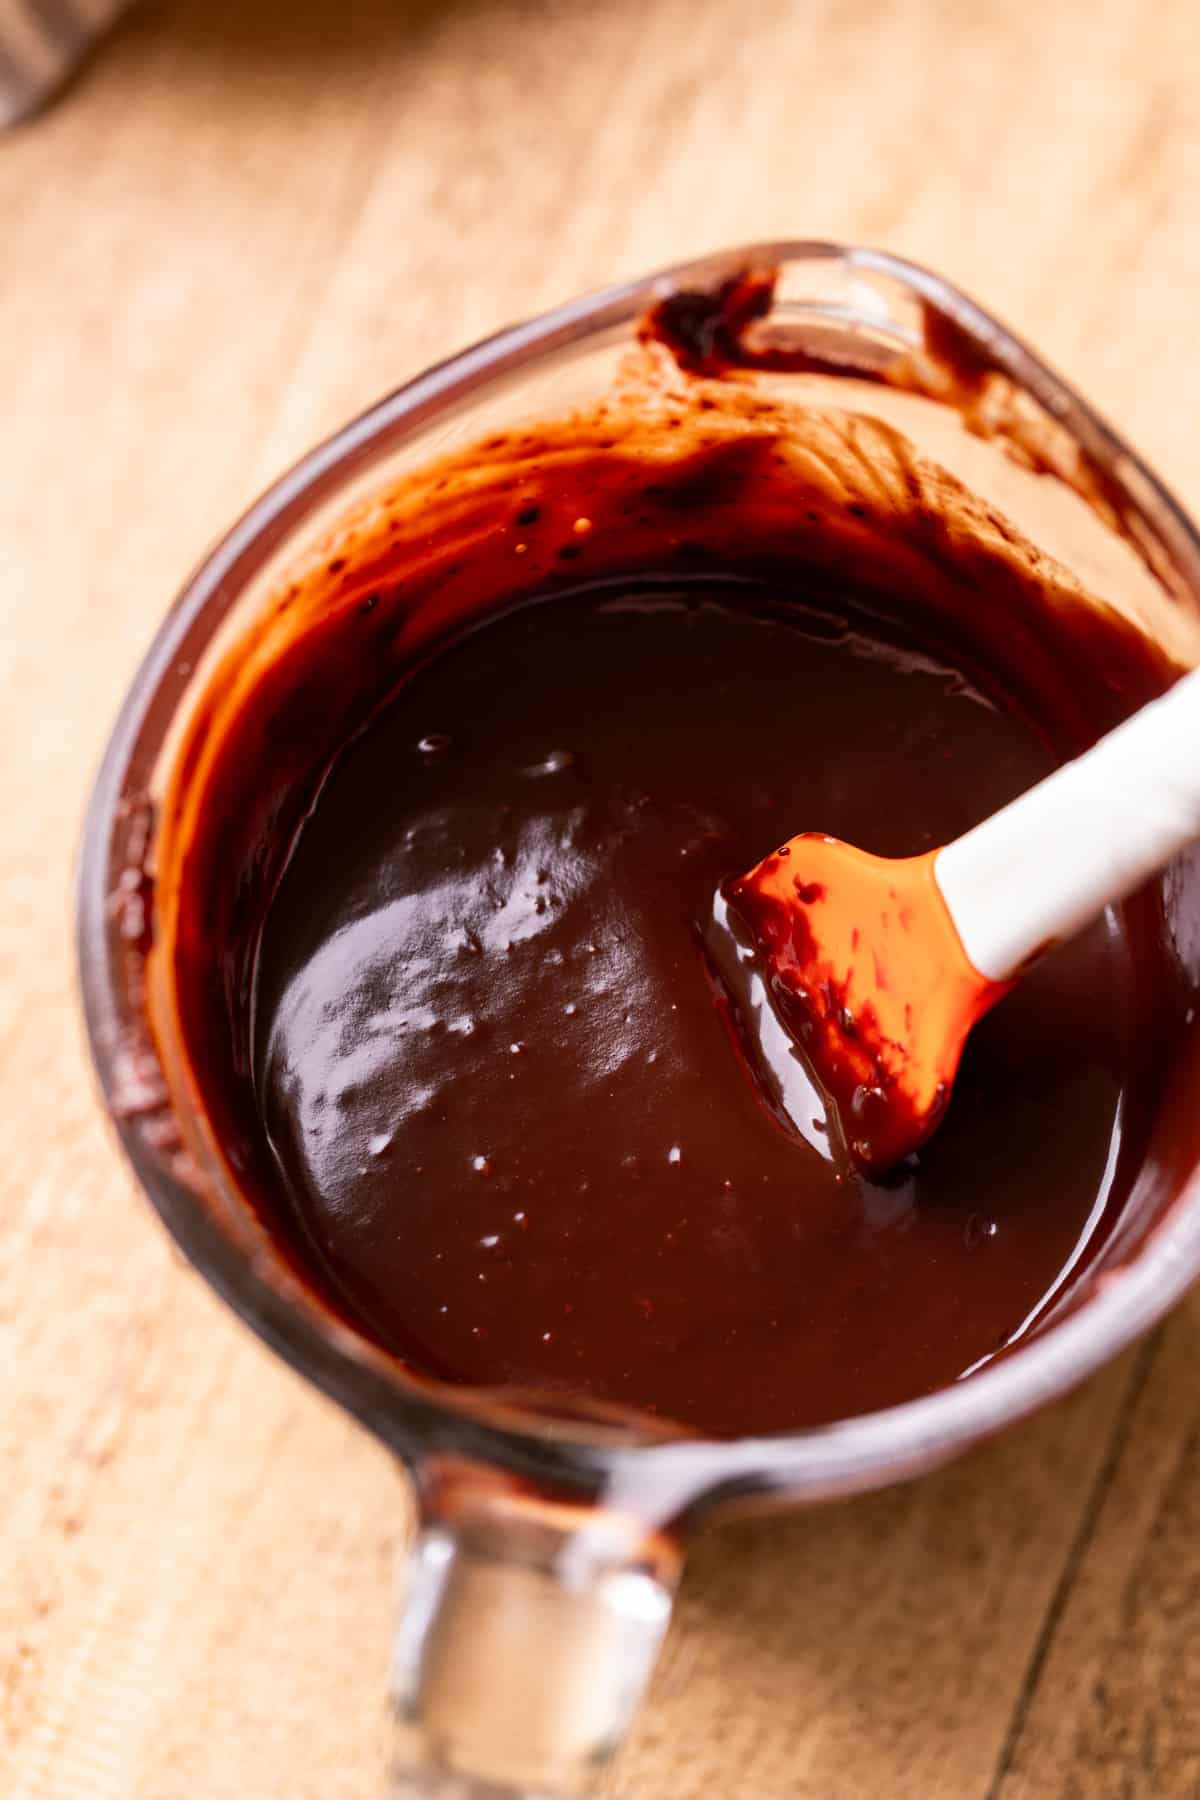 Chocolate glaze in a glass measuring cup.